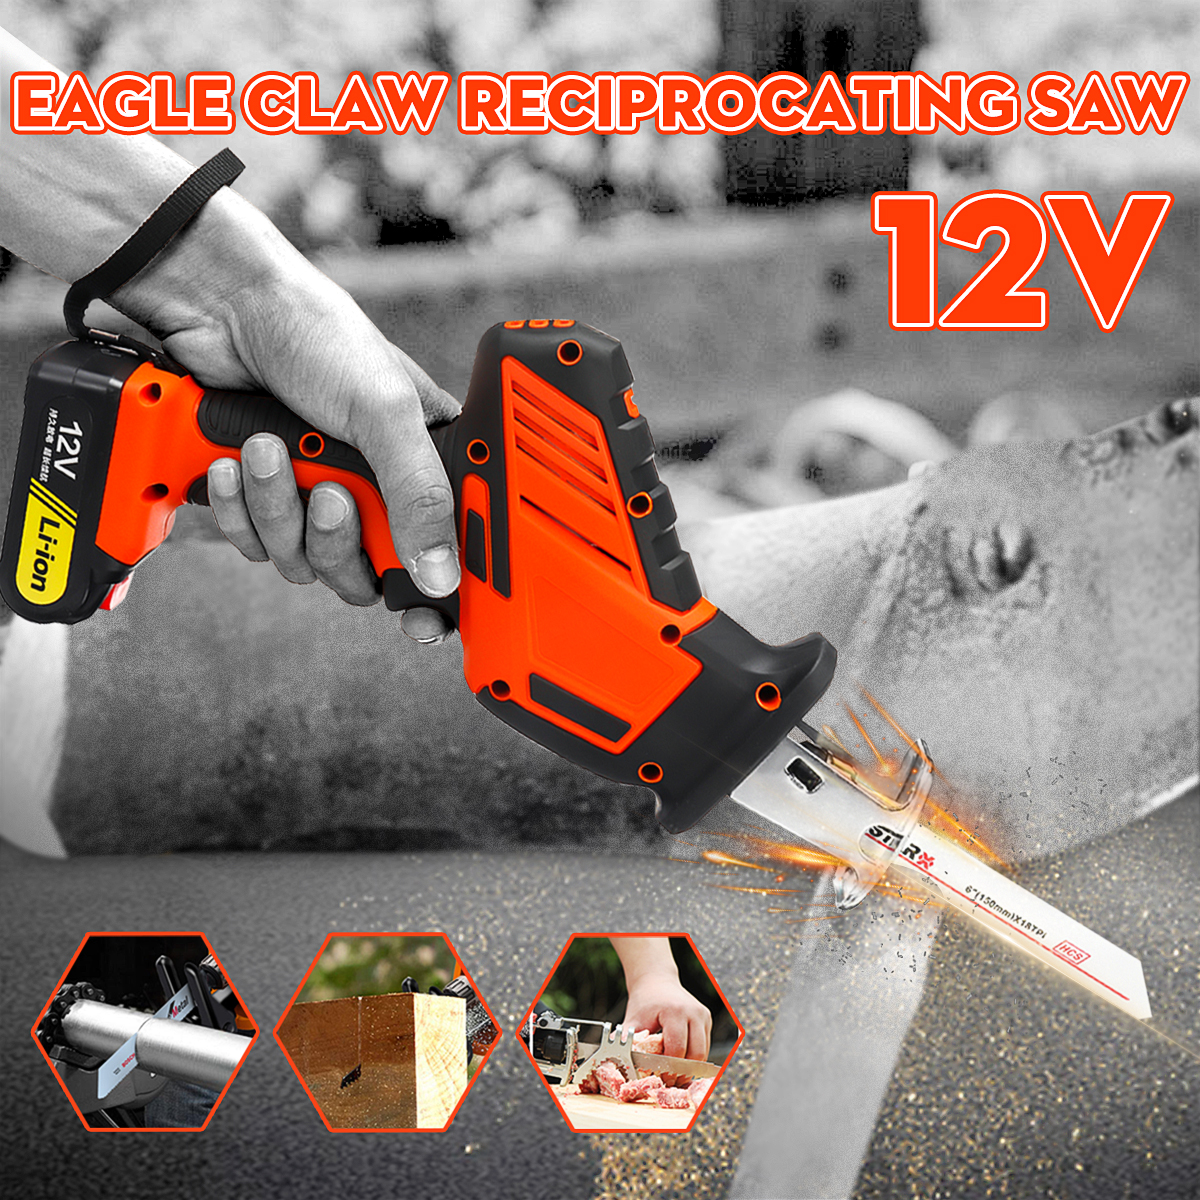 12V/16.8V/21V Reciprocating Saw Kit 2 Lithium Batteries 1 Charger Electric Saw Wood Work Stepless Speed Saws